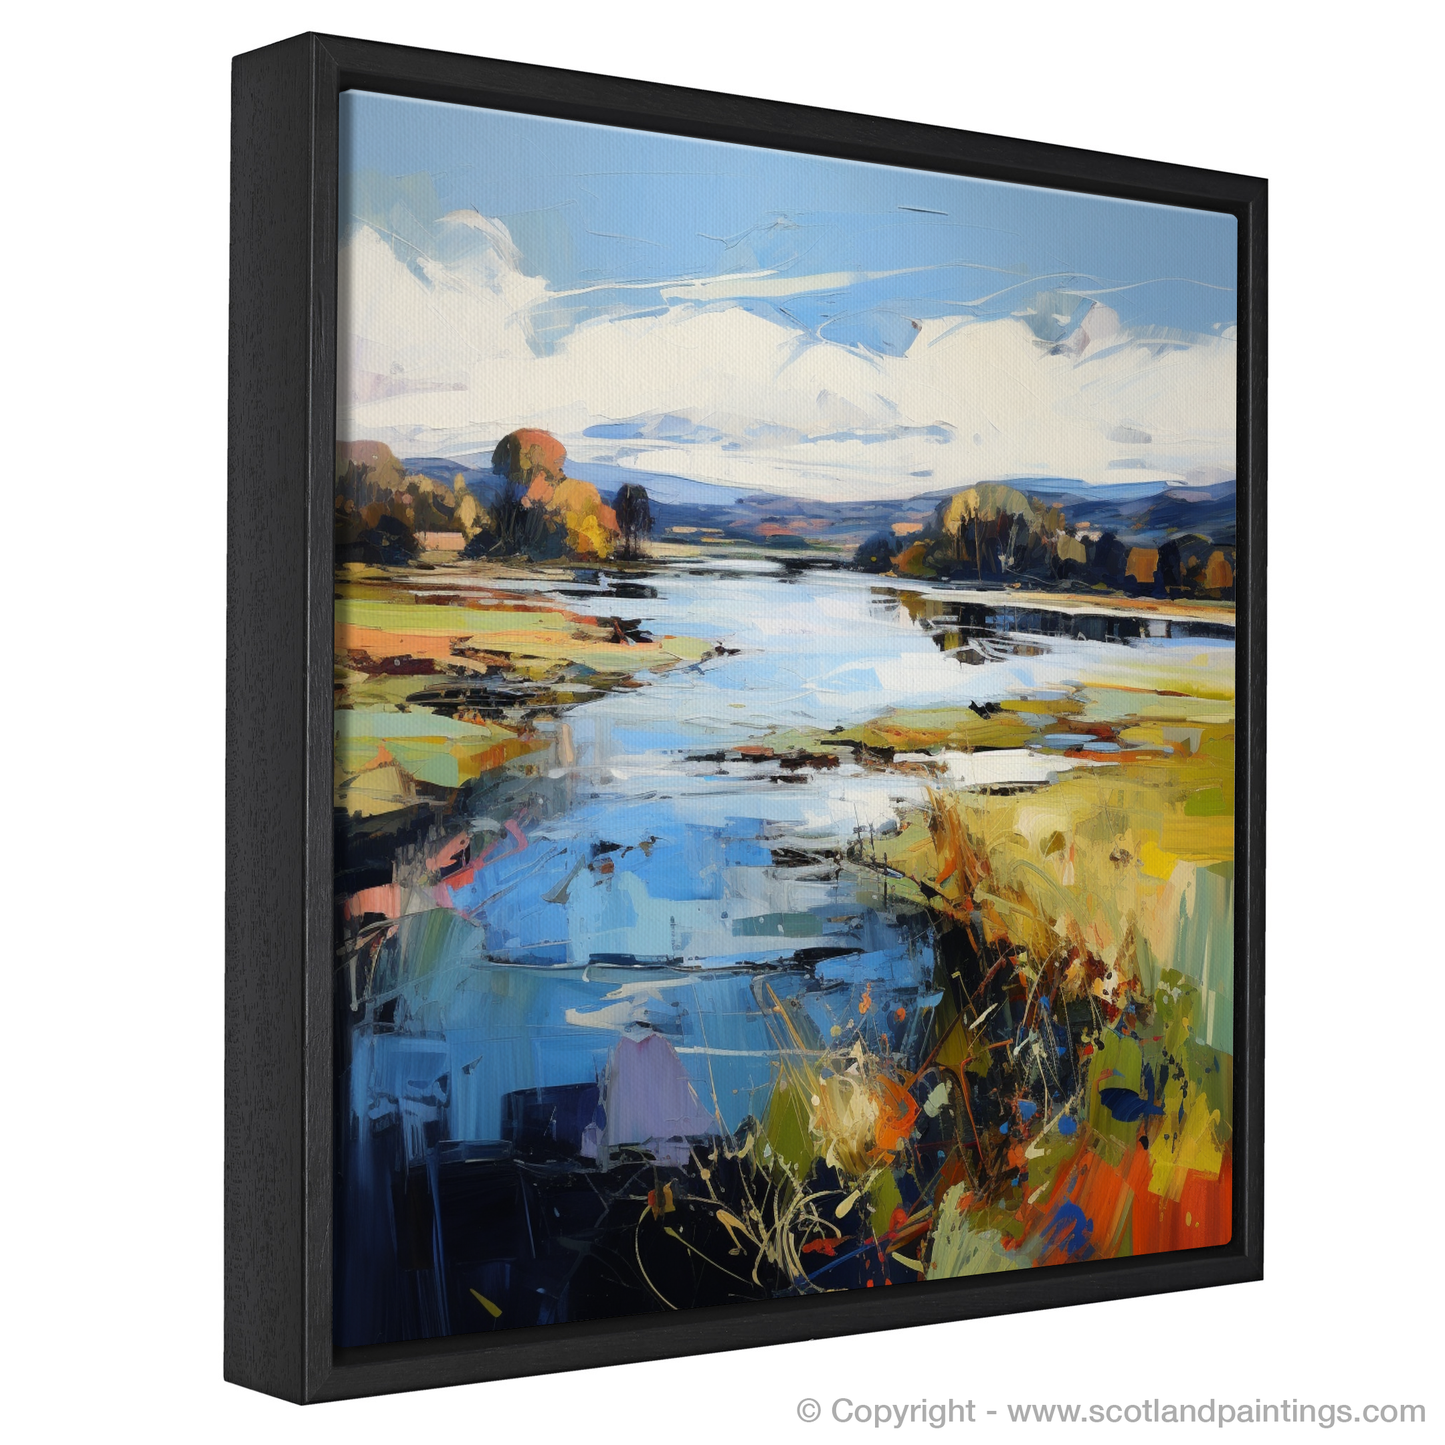 Painting and Art Print of River Nith, Dumfries and Galloway. Vibrant Symphony of the River Nith.